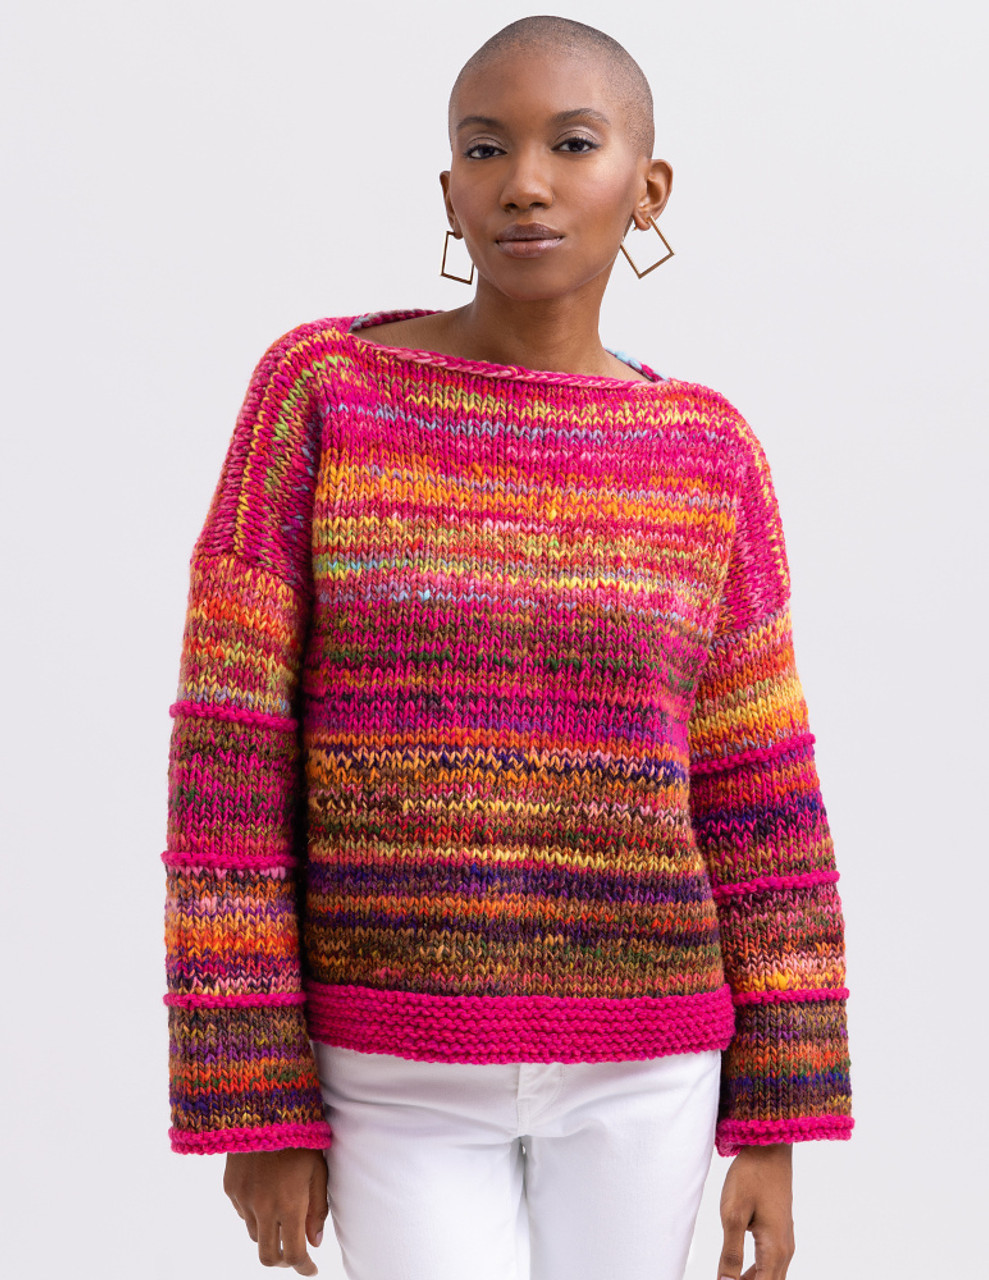 Noro Magazine #23 Fall/Winter 24 – Mother of Purl Yarn Shop